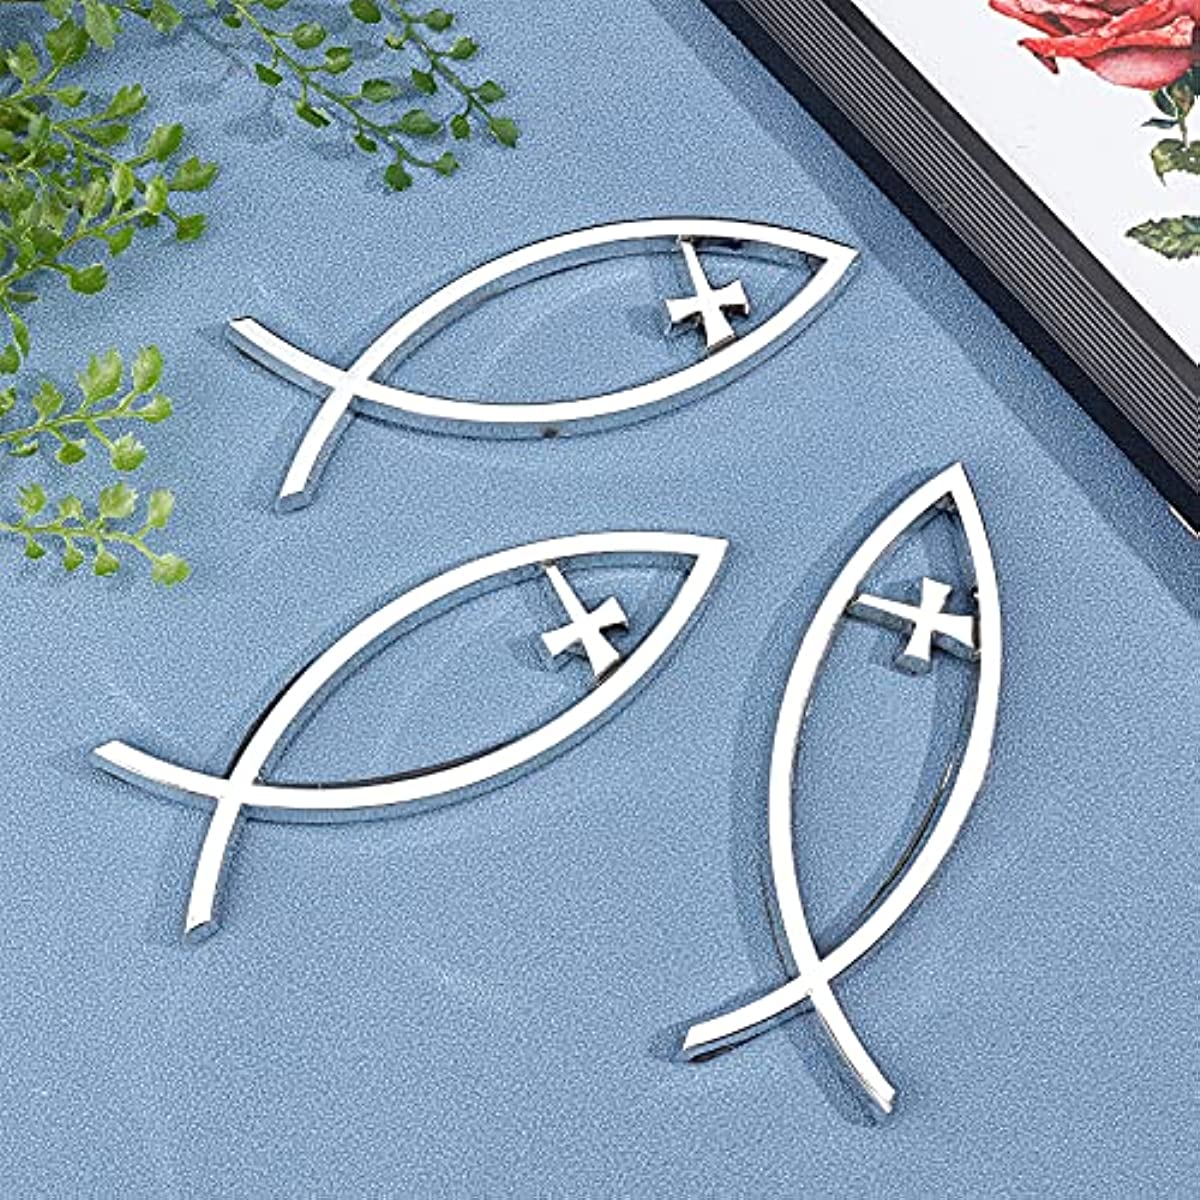 3pcs Silver ABS Plastic Jesus Fish Decal Sticker 5.5x1.8Inch 3D Car Decal Emblem Sticker Religious God for Jesus Christian Fish Symbol - image 5 of 9